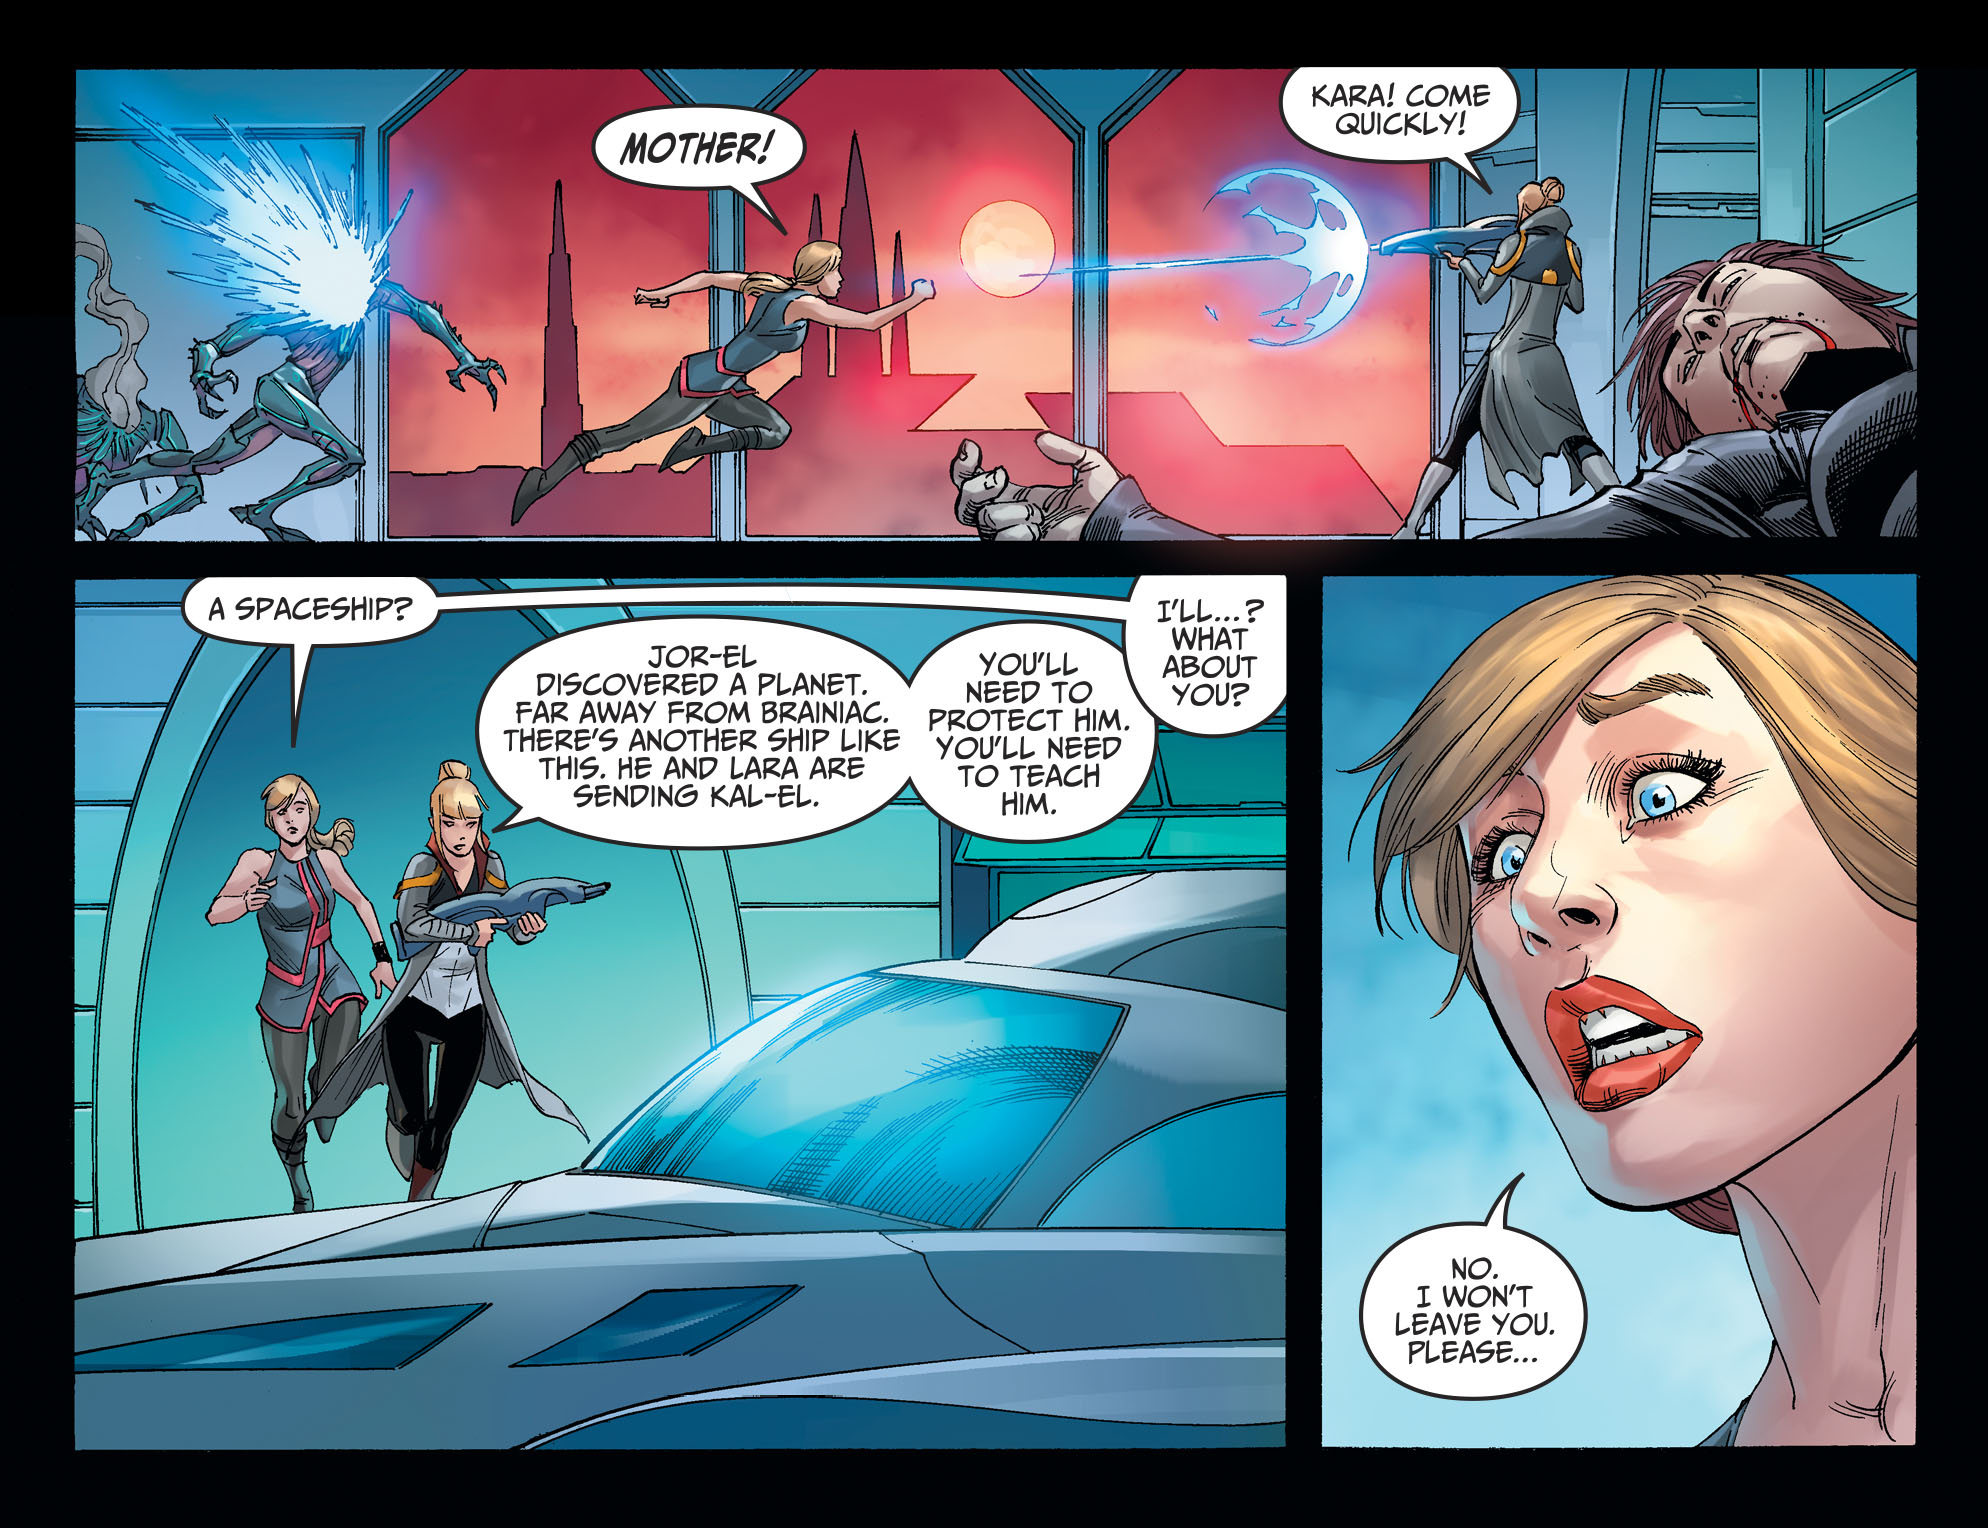 Witness The Moment Supergirl Arrives In The World Of Injustice 